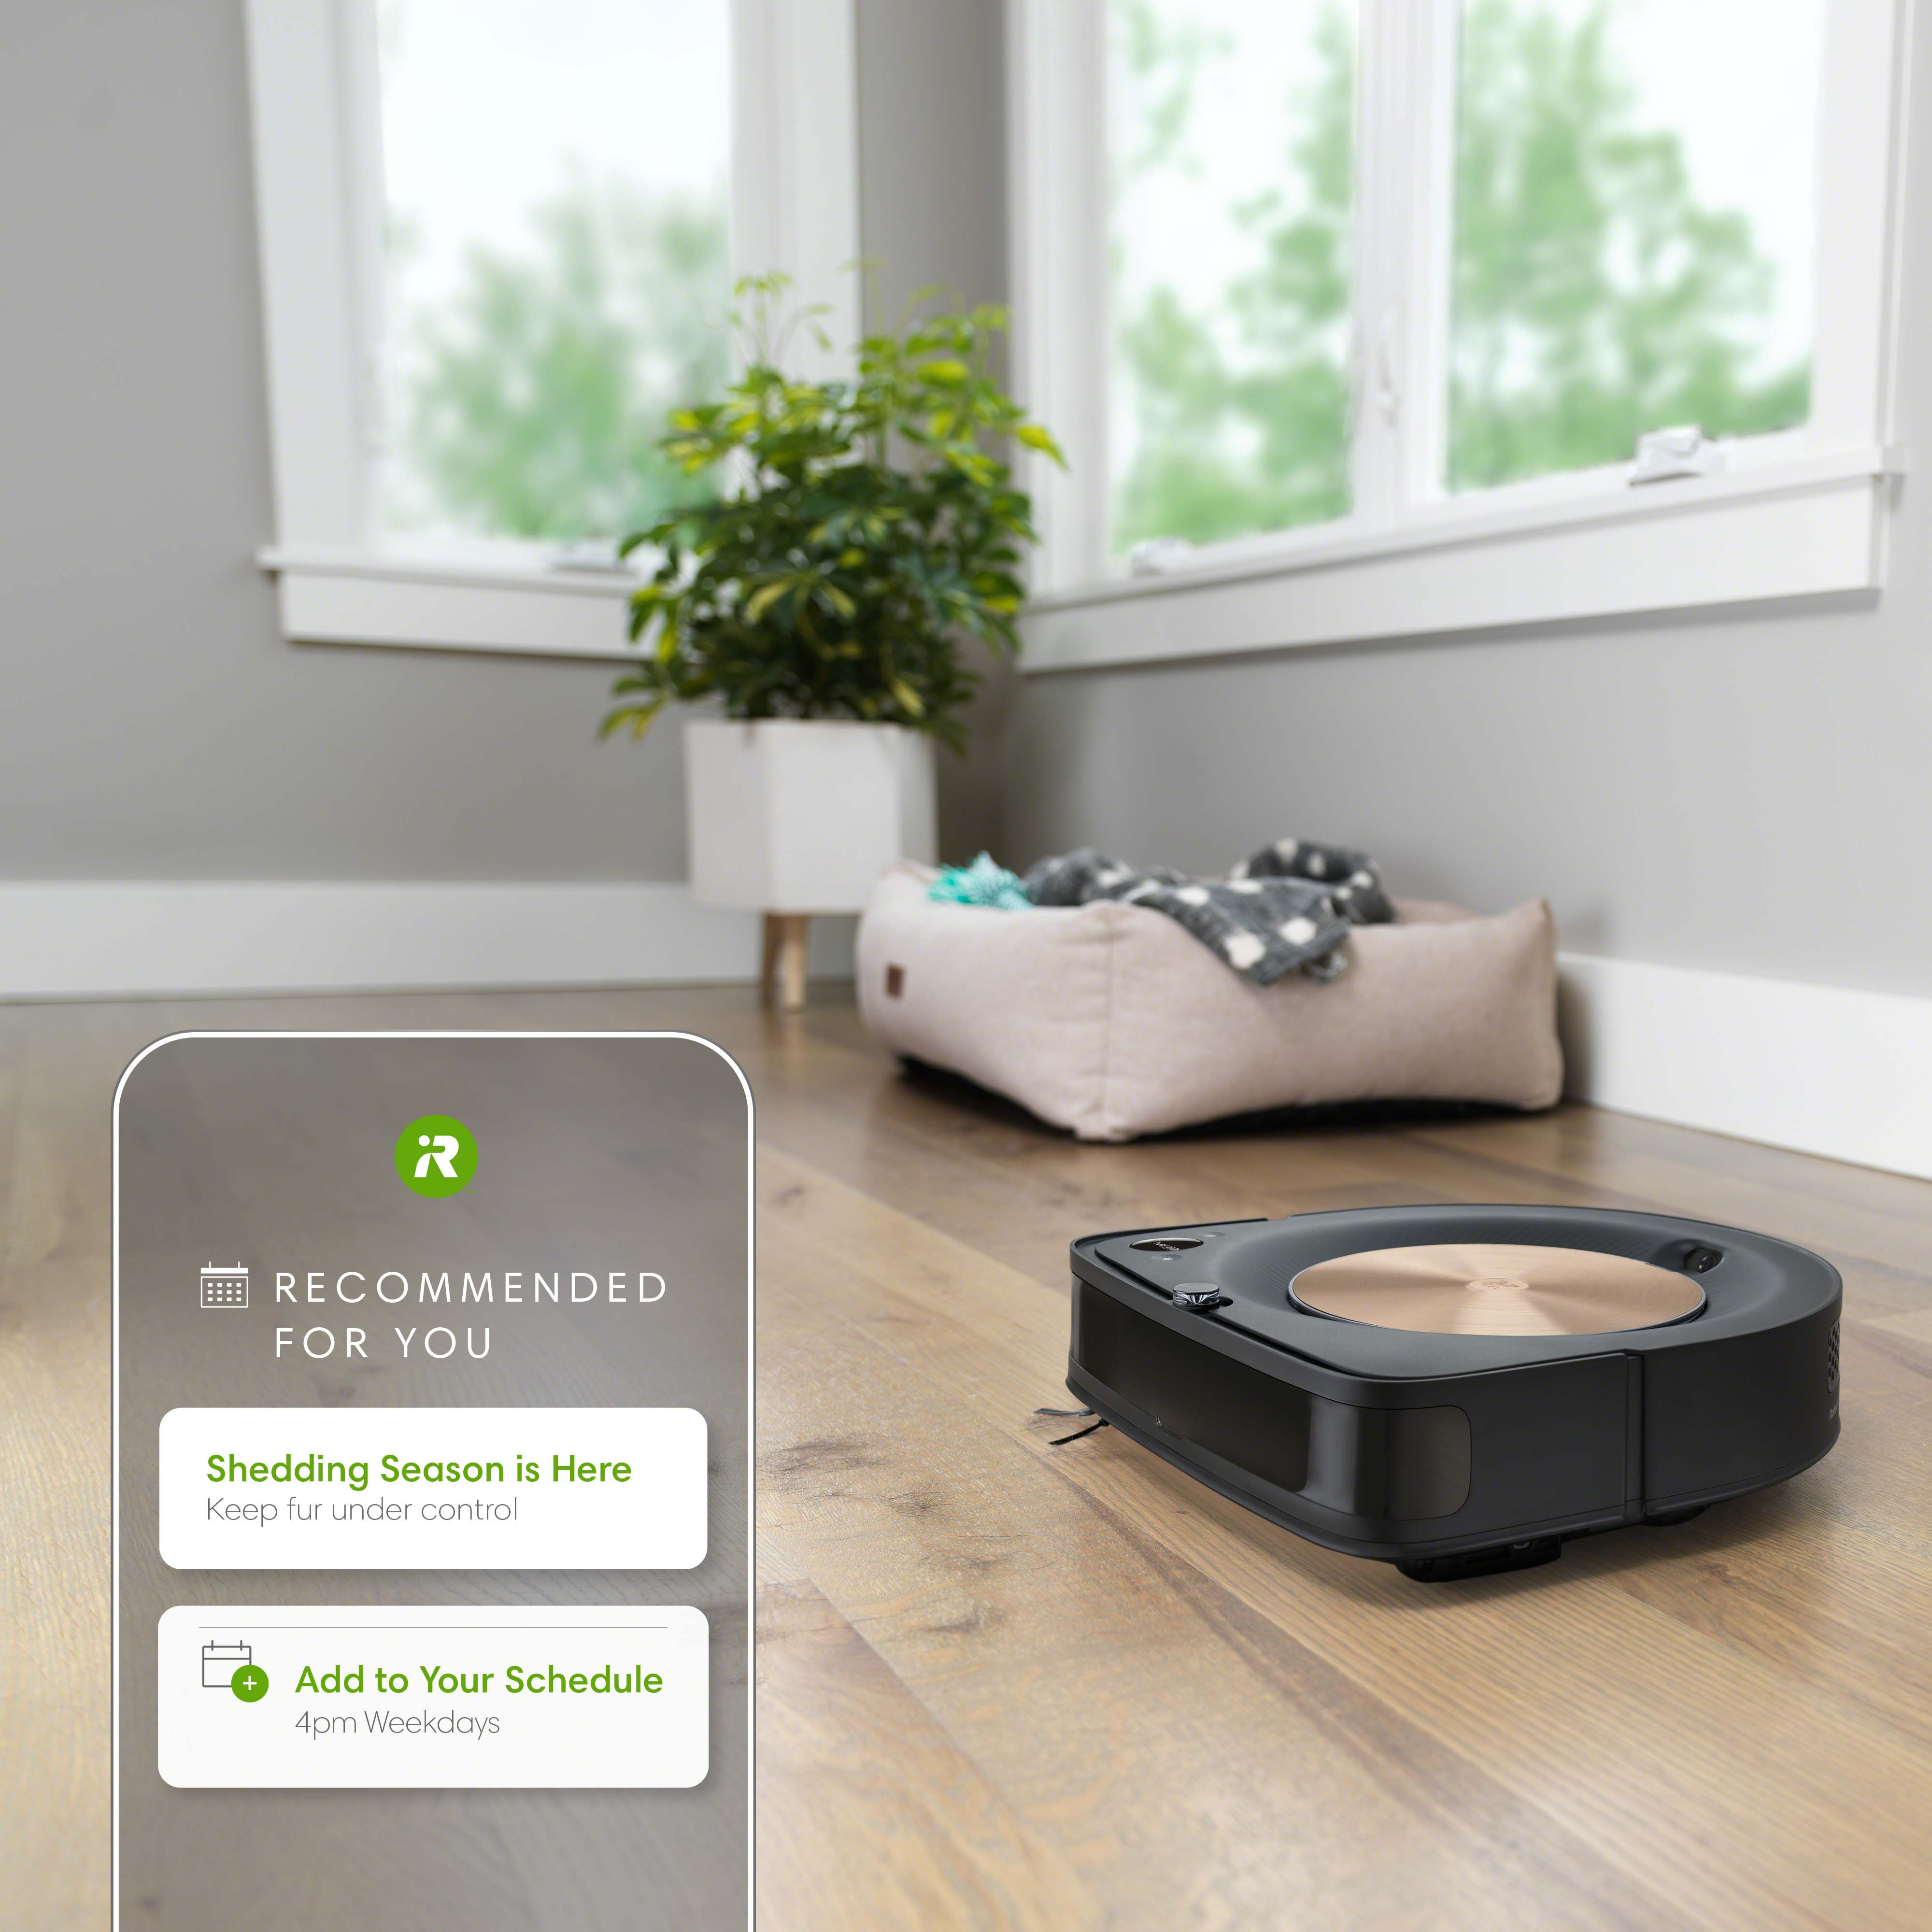 iRobot Roomba s9 (9150) Robot Vacuum- Wi-Fi Connected, Smart Mapping, Powerful  Suction, Works with Google Home, Ideal for Pet Hair, Carpets, Hard Floors 